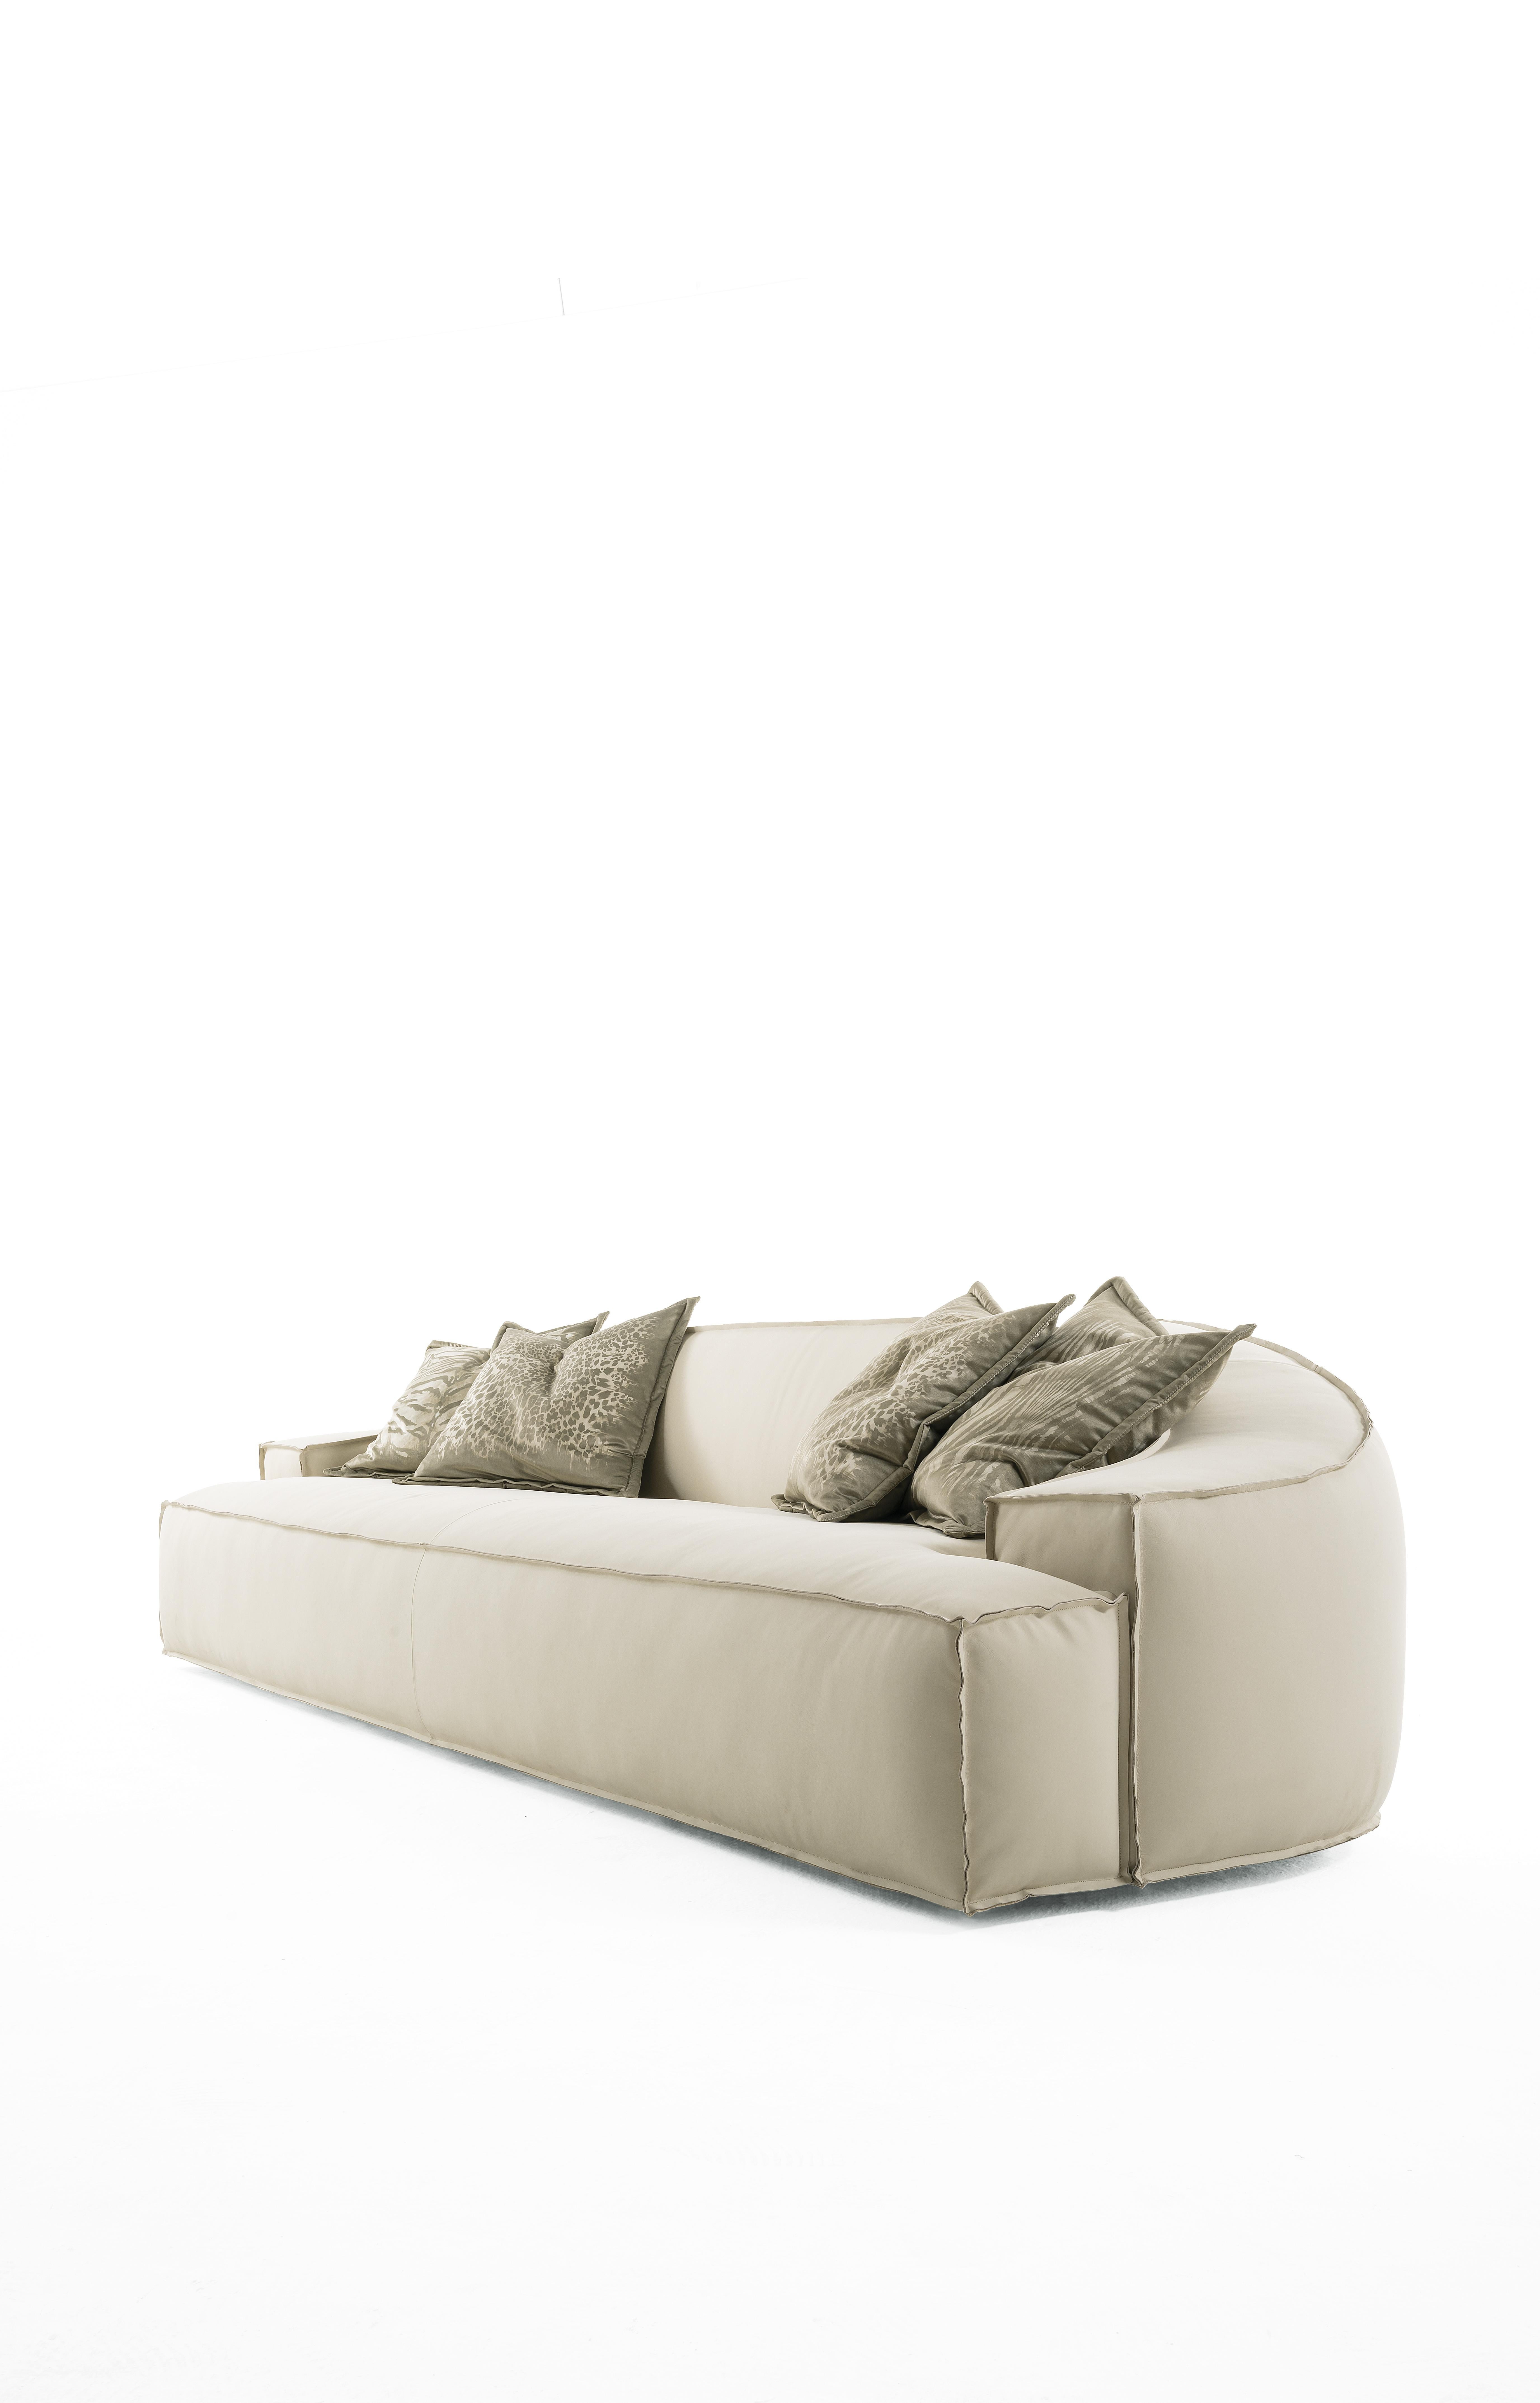 Assal is a sofa with soft and sensual shapes – an invitation to relaxation and conviviality. Its clean design and subtle elegance are enhanced by the soft leather upholstery with decorative stitching in a delicate shade of beige, while the cushions